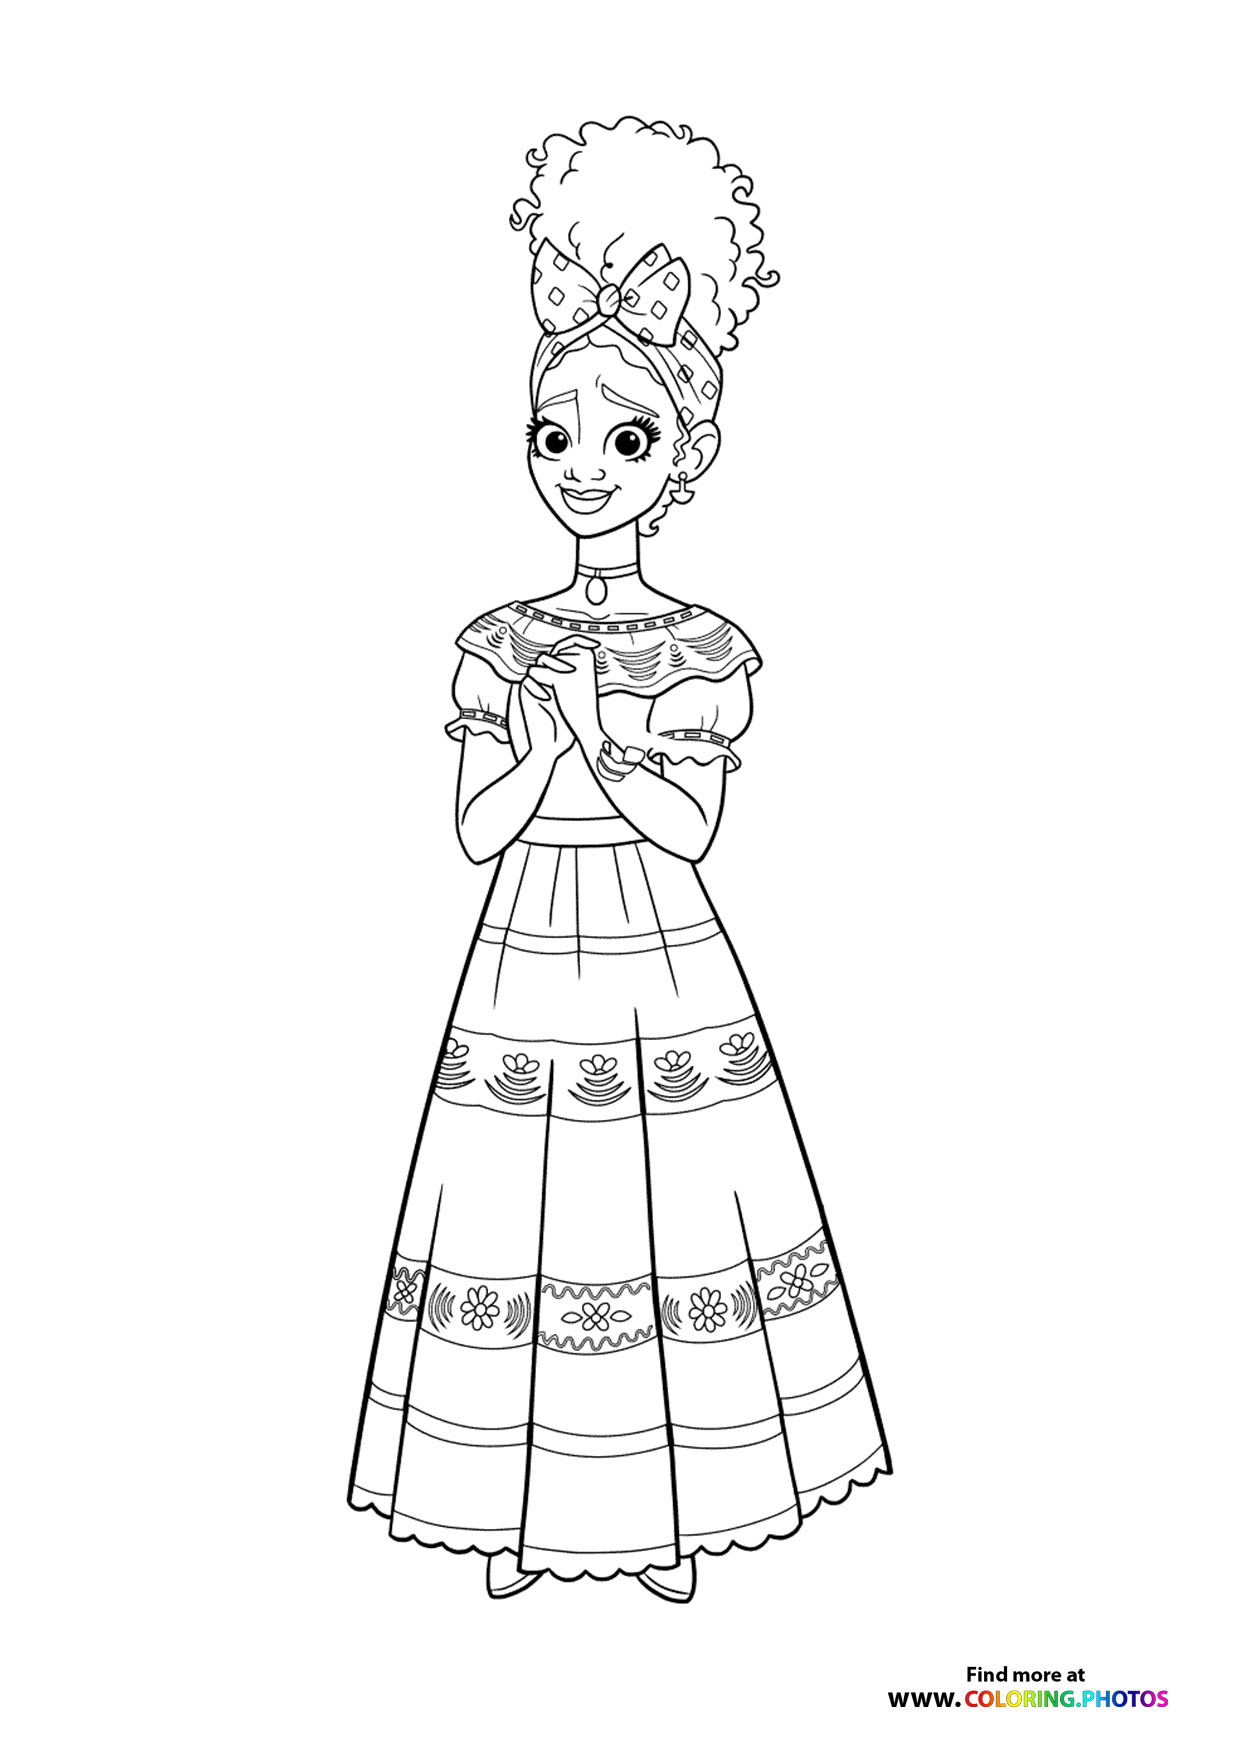 Coloring Pages For Kids Frozen ~ Coloring Page